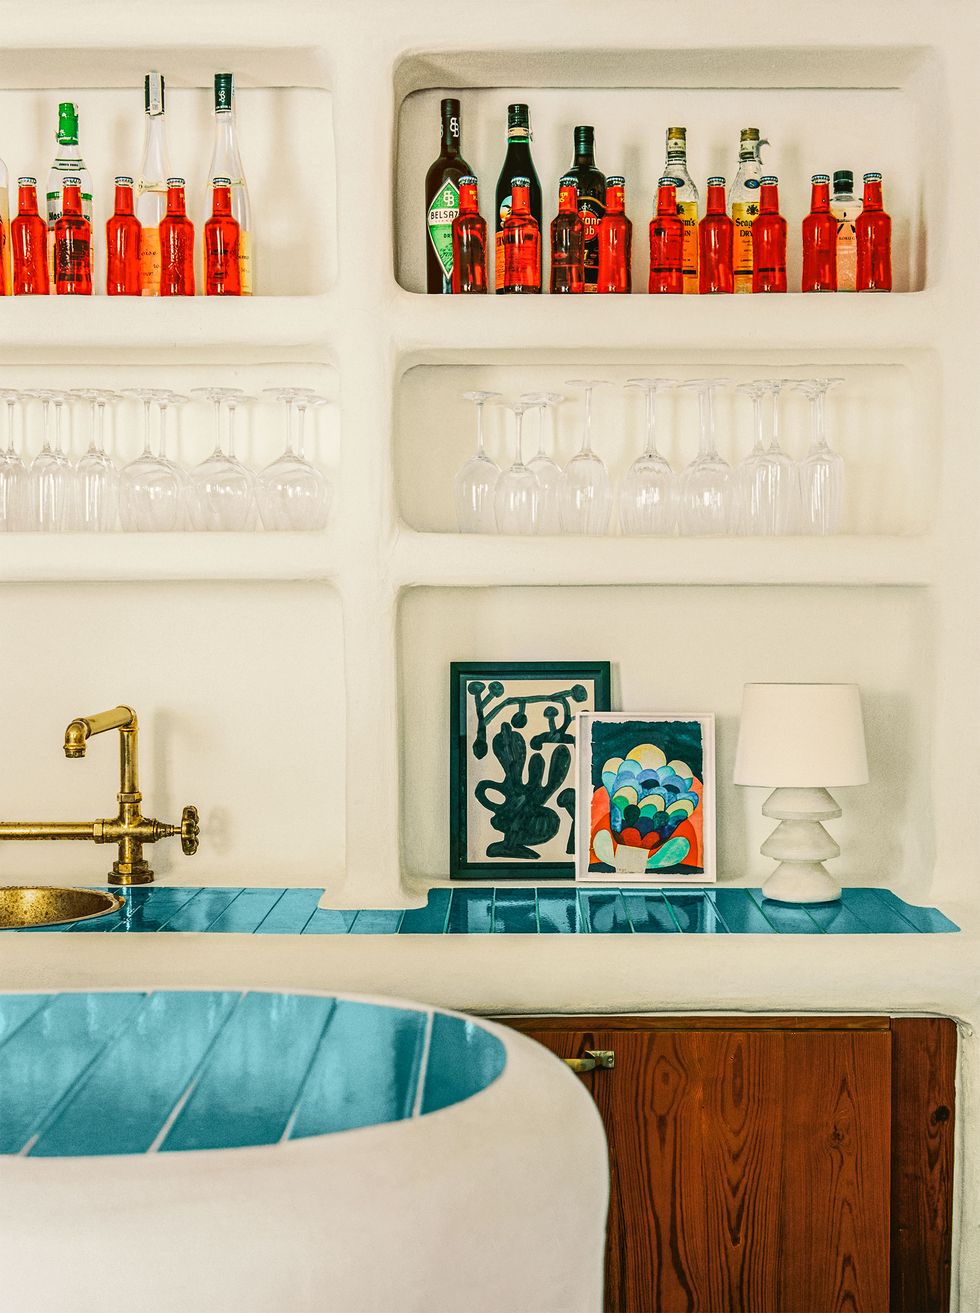 closeup of white stone curved bar, bar and countertop behind it are topped with turquoise tiles, brass faucet and sink, small artworks and a lamp, bottles and glasses are inset into wall above bar